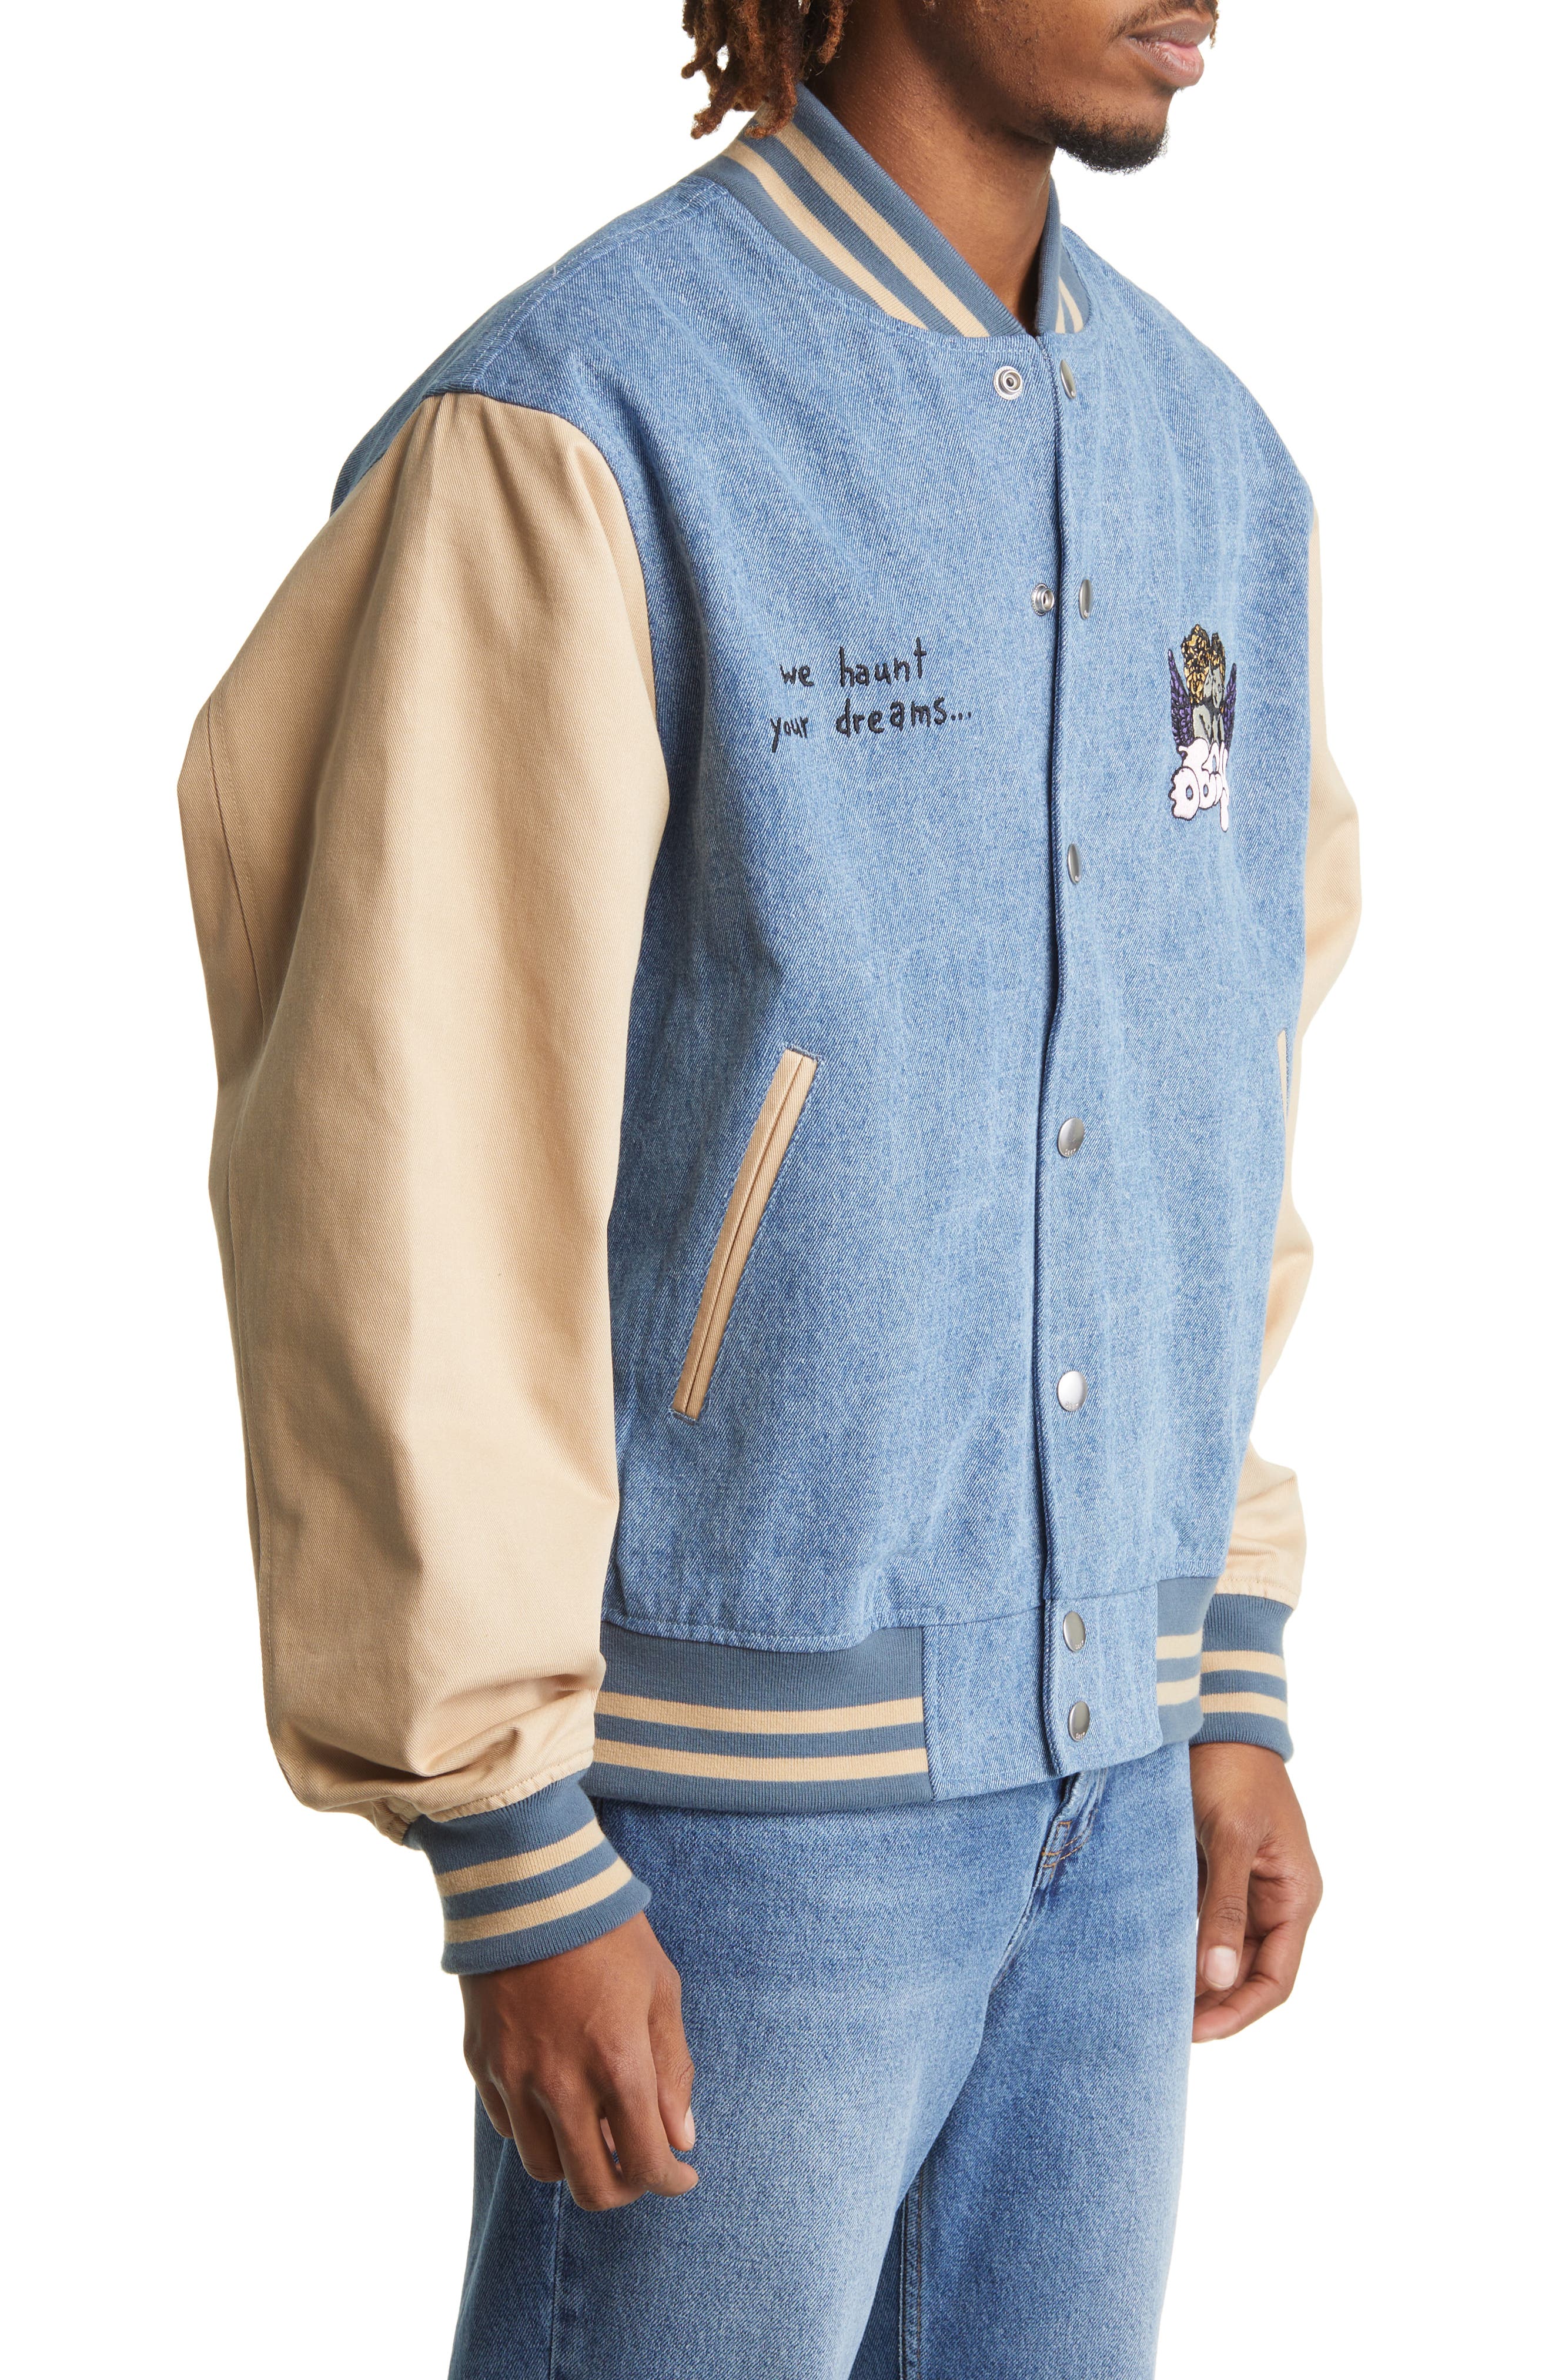 Obey Roll Call Varsity Jacket in Surf Blue